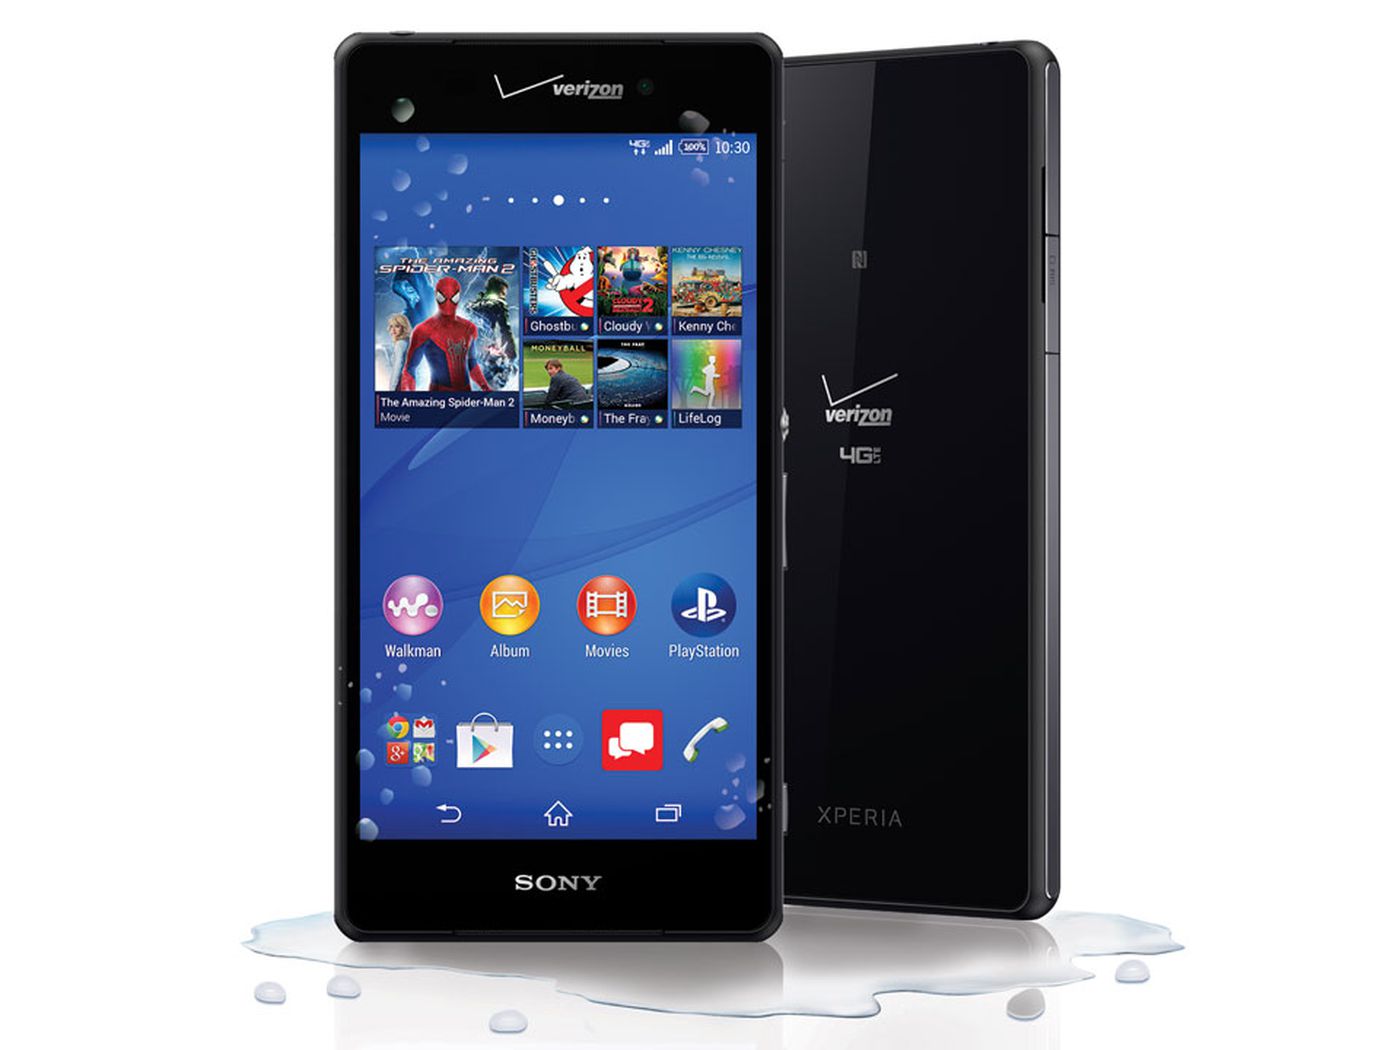 virus-cleanup-on-xperia-zv3-a-step-by-step-guide